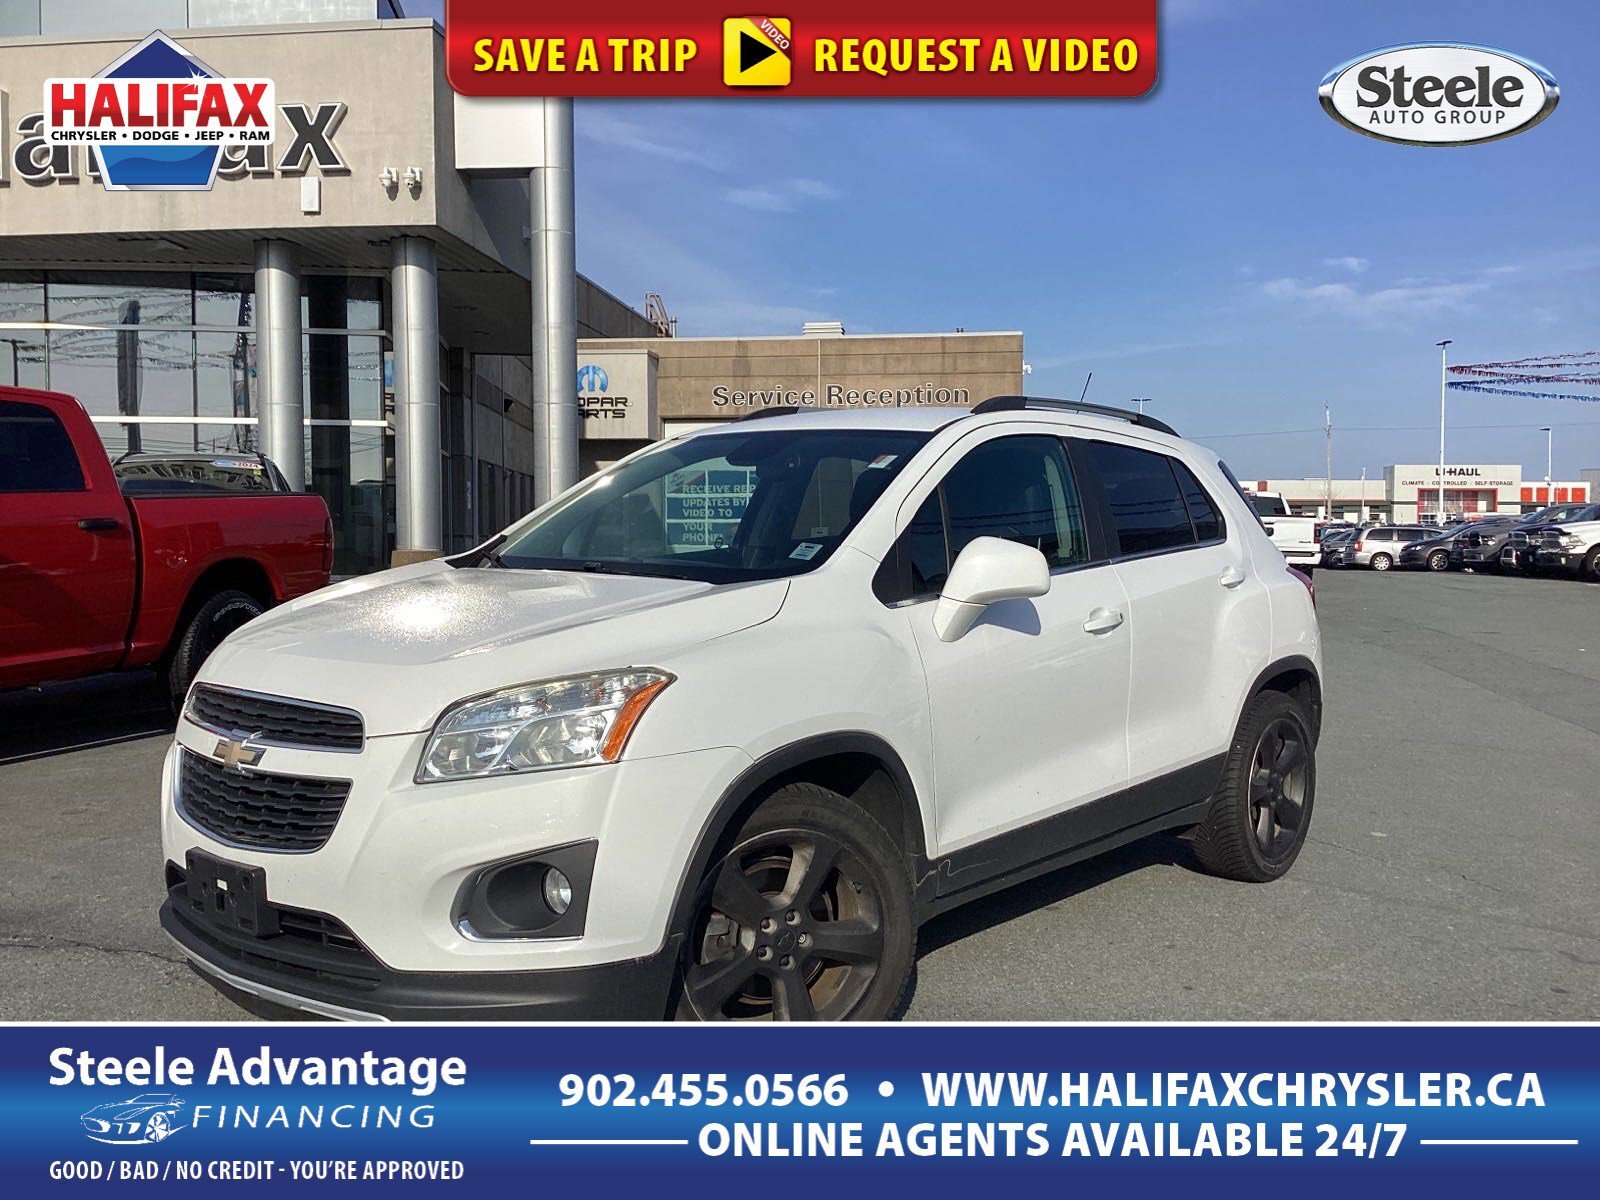 2015 Chevrolet Trax LTZ - LOW KM, HEATED LEATHER SEATS, BACK UP CAMERA